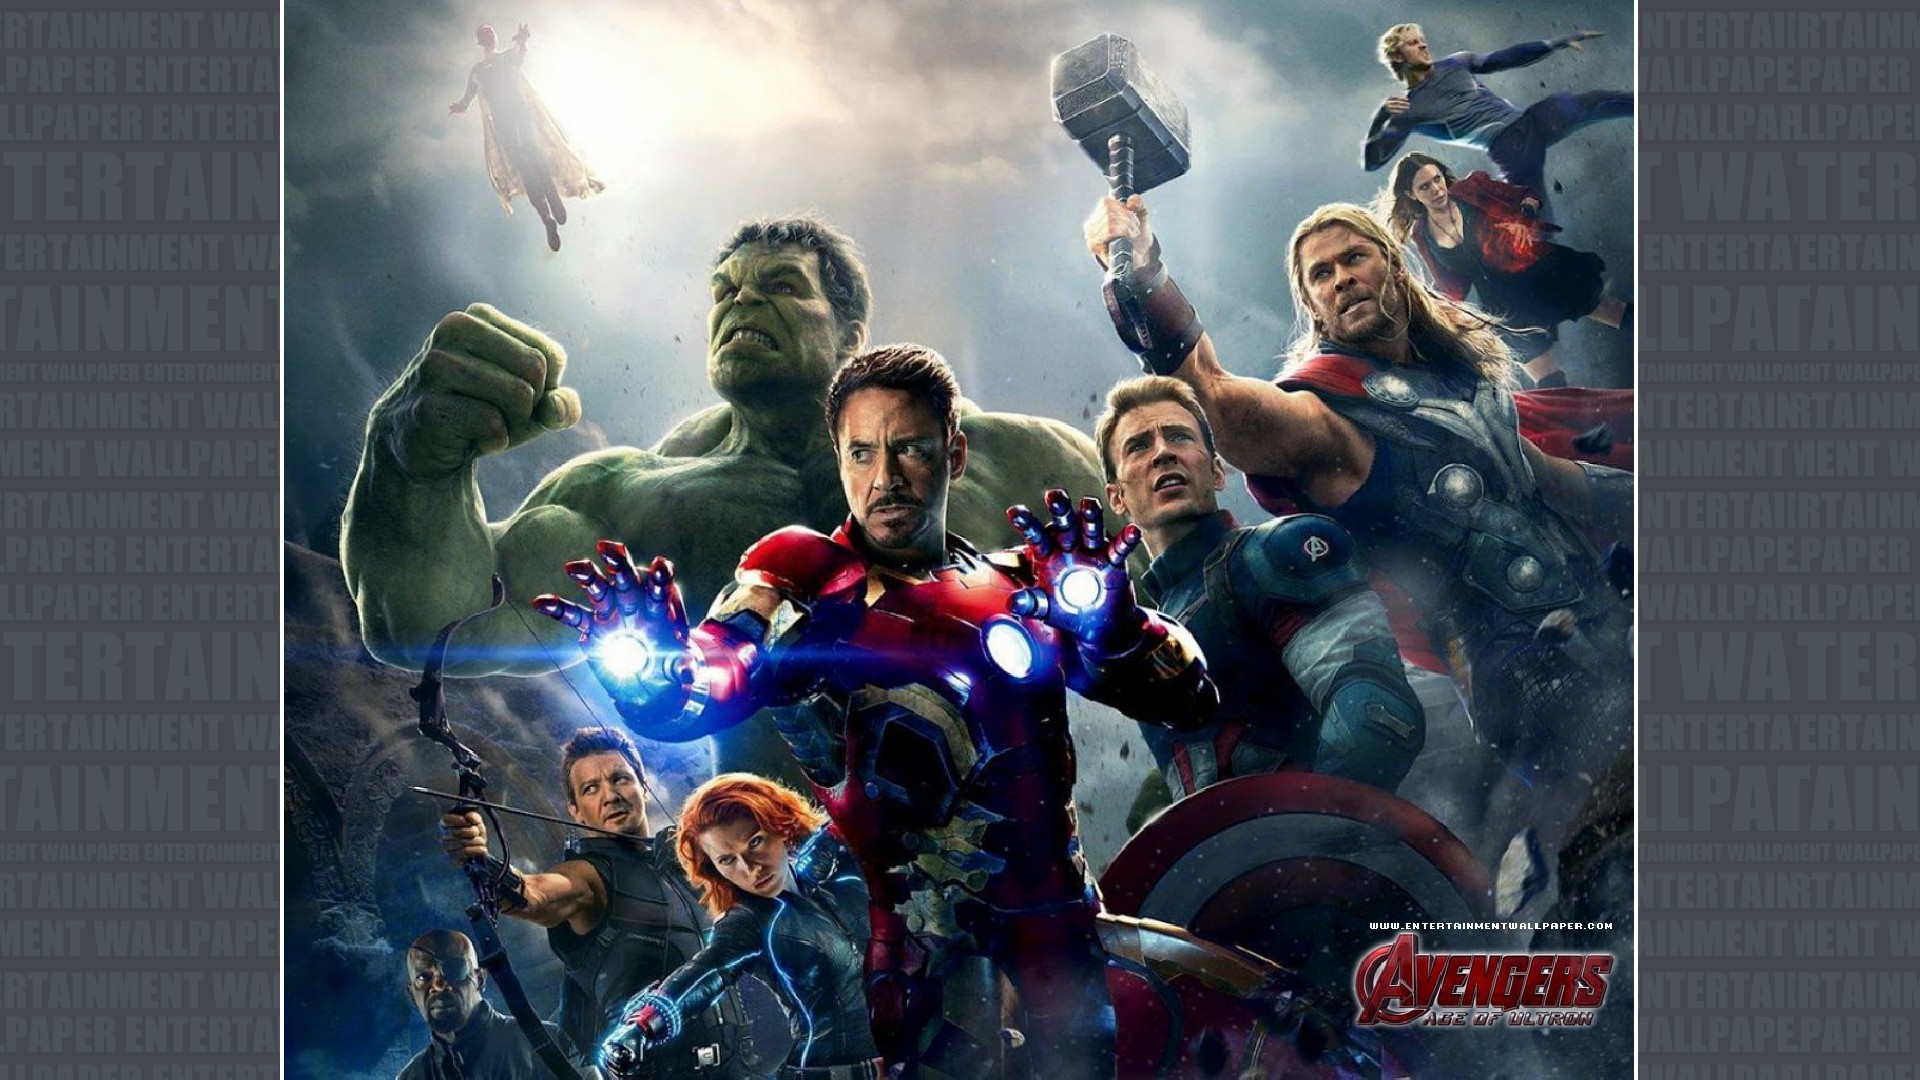 age of ultron wallpaper 10045678 size 1920x1080 more avengers